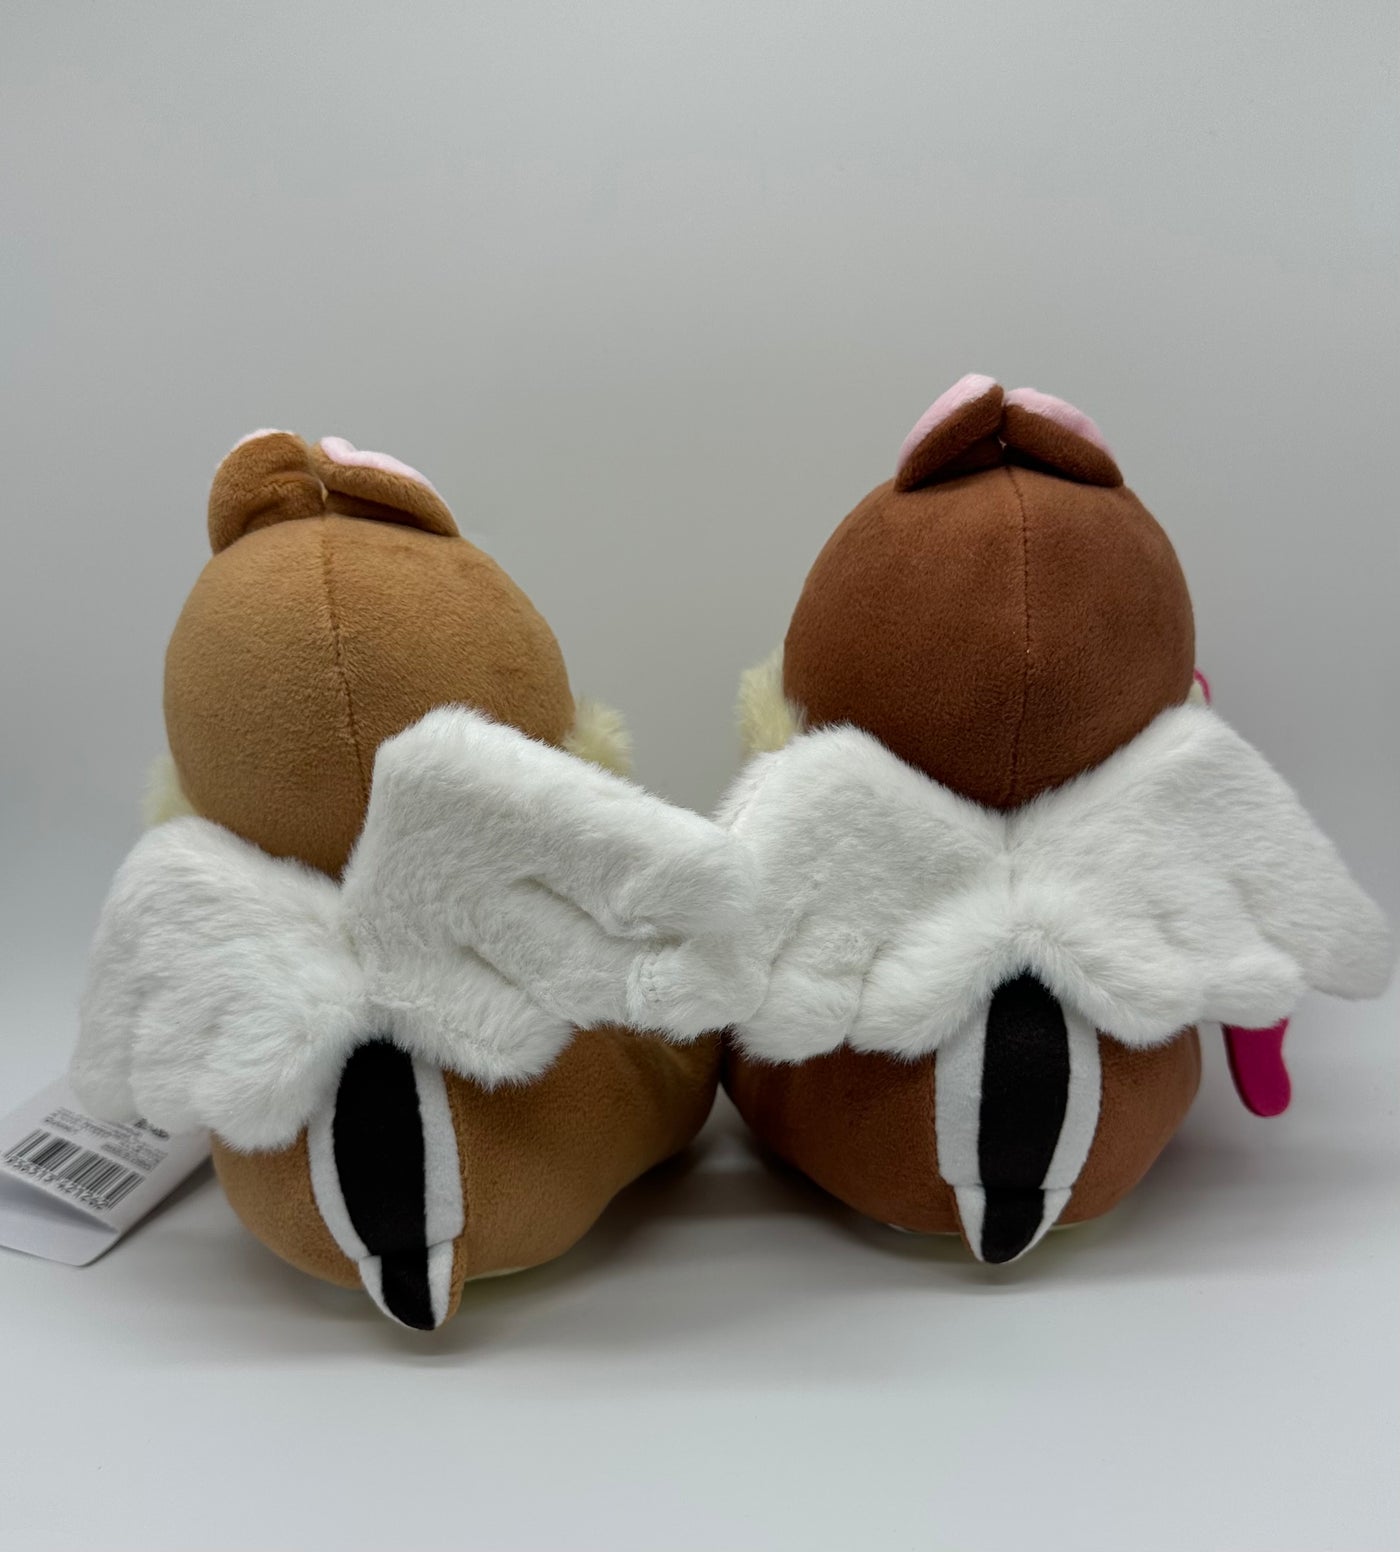 Disney Store Japan Valentine Chip 'n Dale Cupid Plush New with Tag